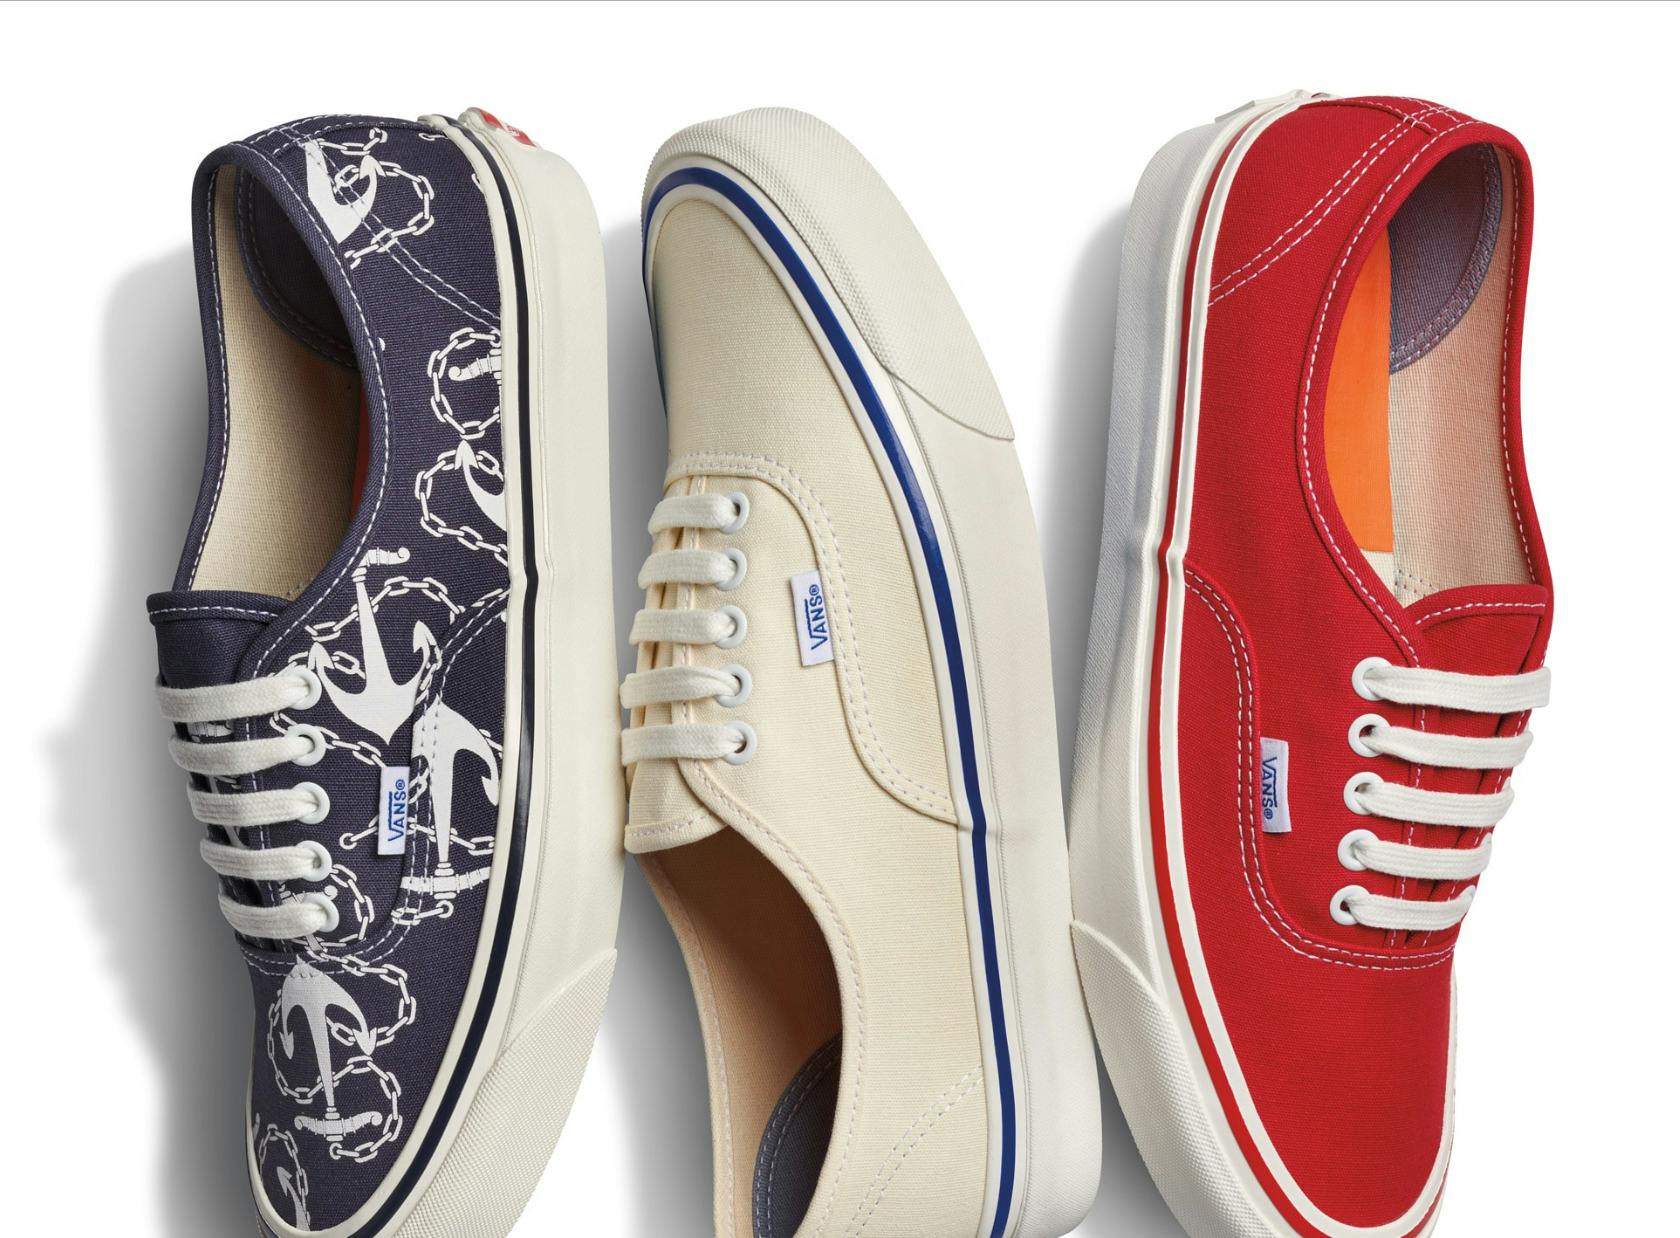 Vans Authentic 44 Deck DX in three OG colorways shoes